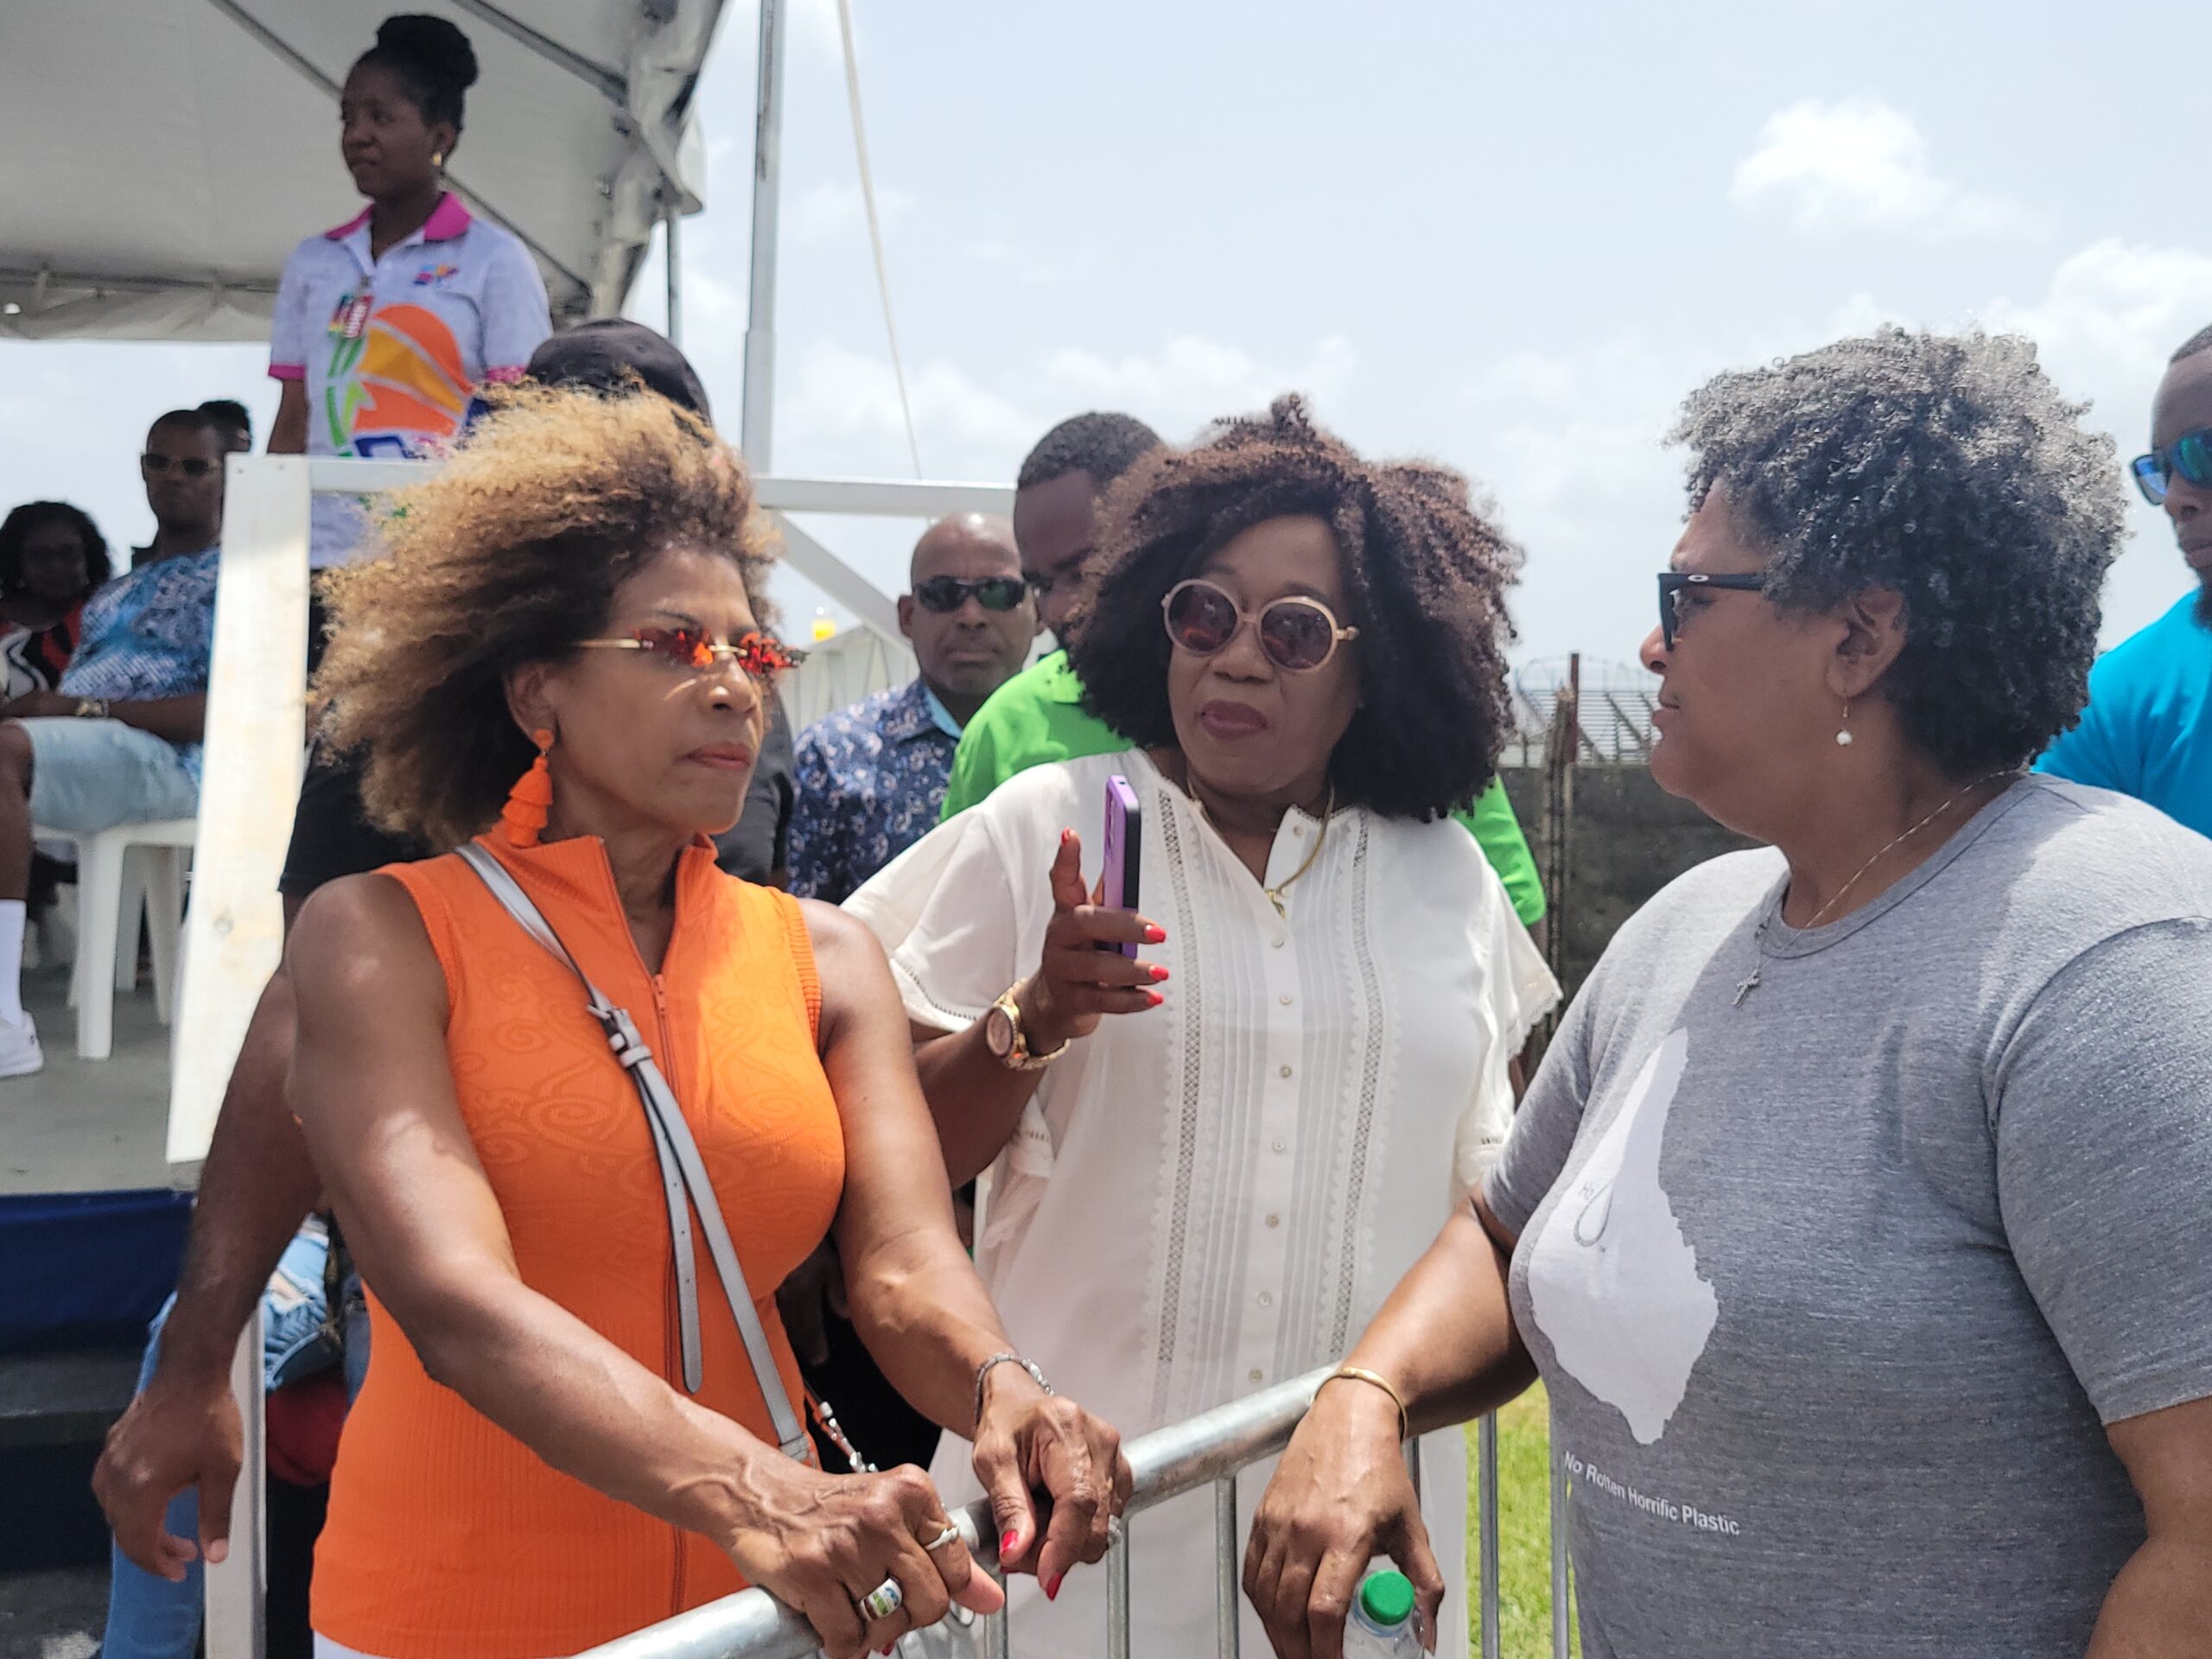 Junior Kadooment Receives Positive Feedback from Stakeholders, CEO Satisfied with Event Improvements